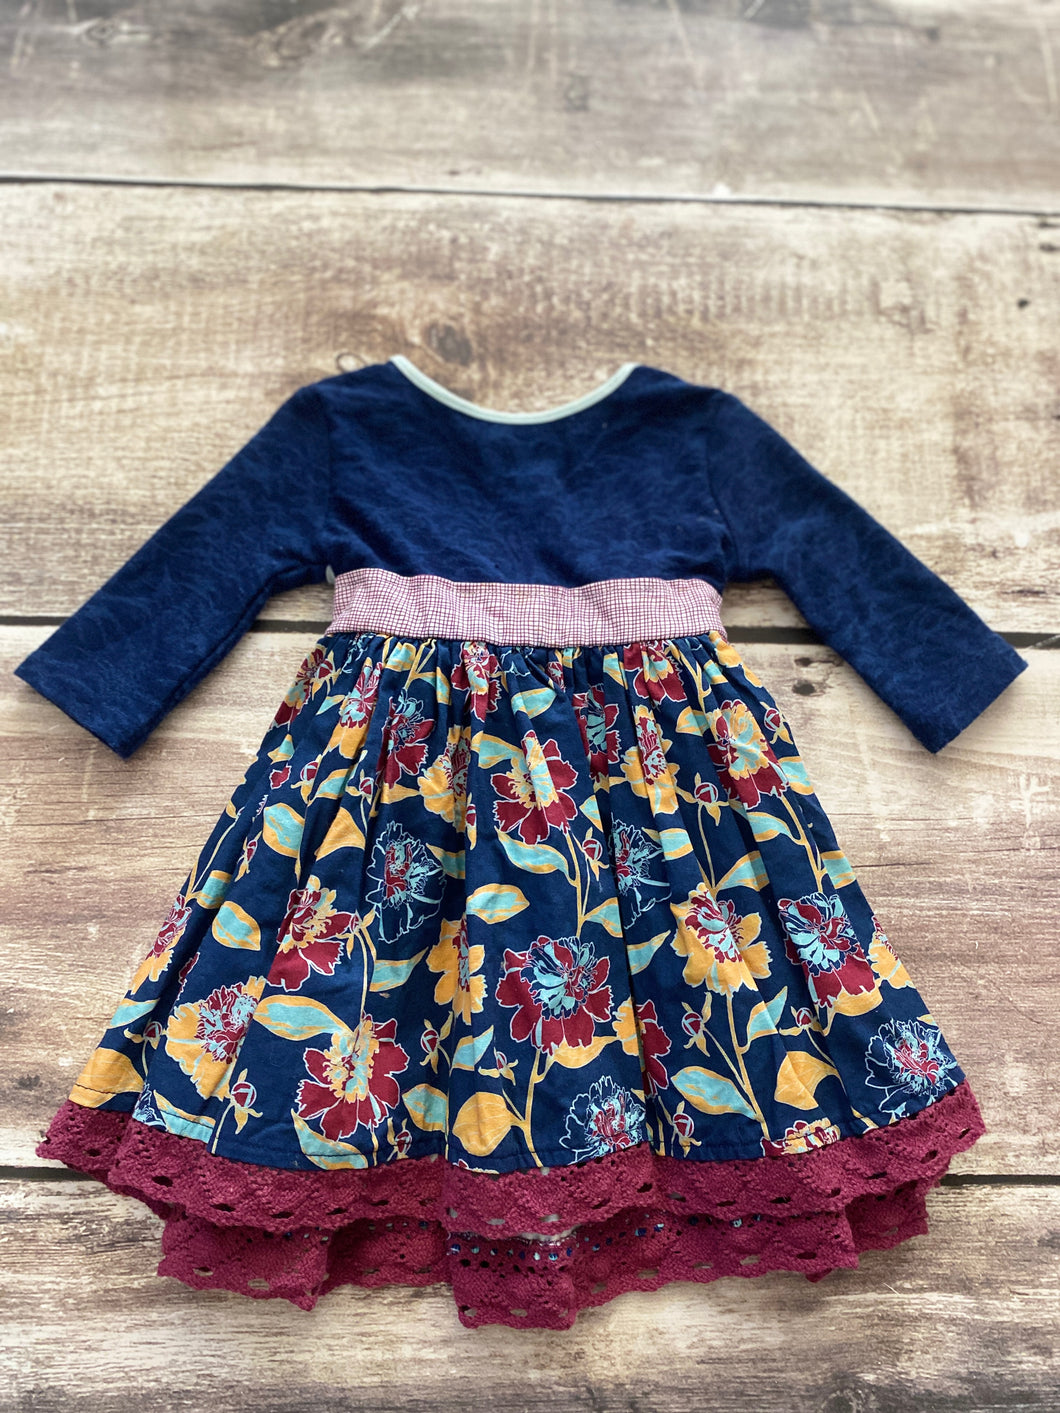 Persnickety 12-18 month dress